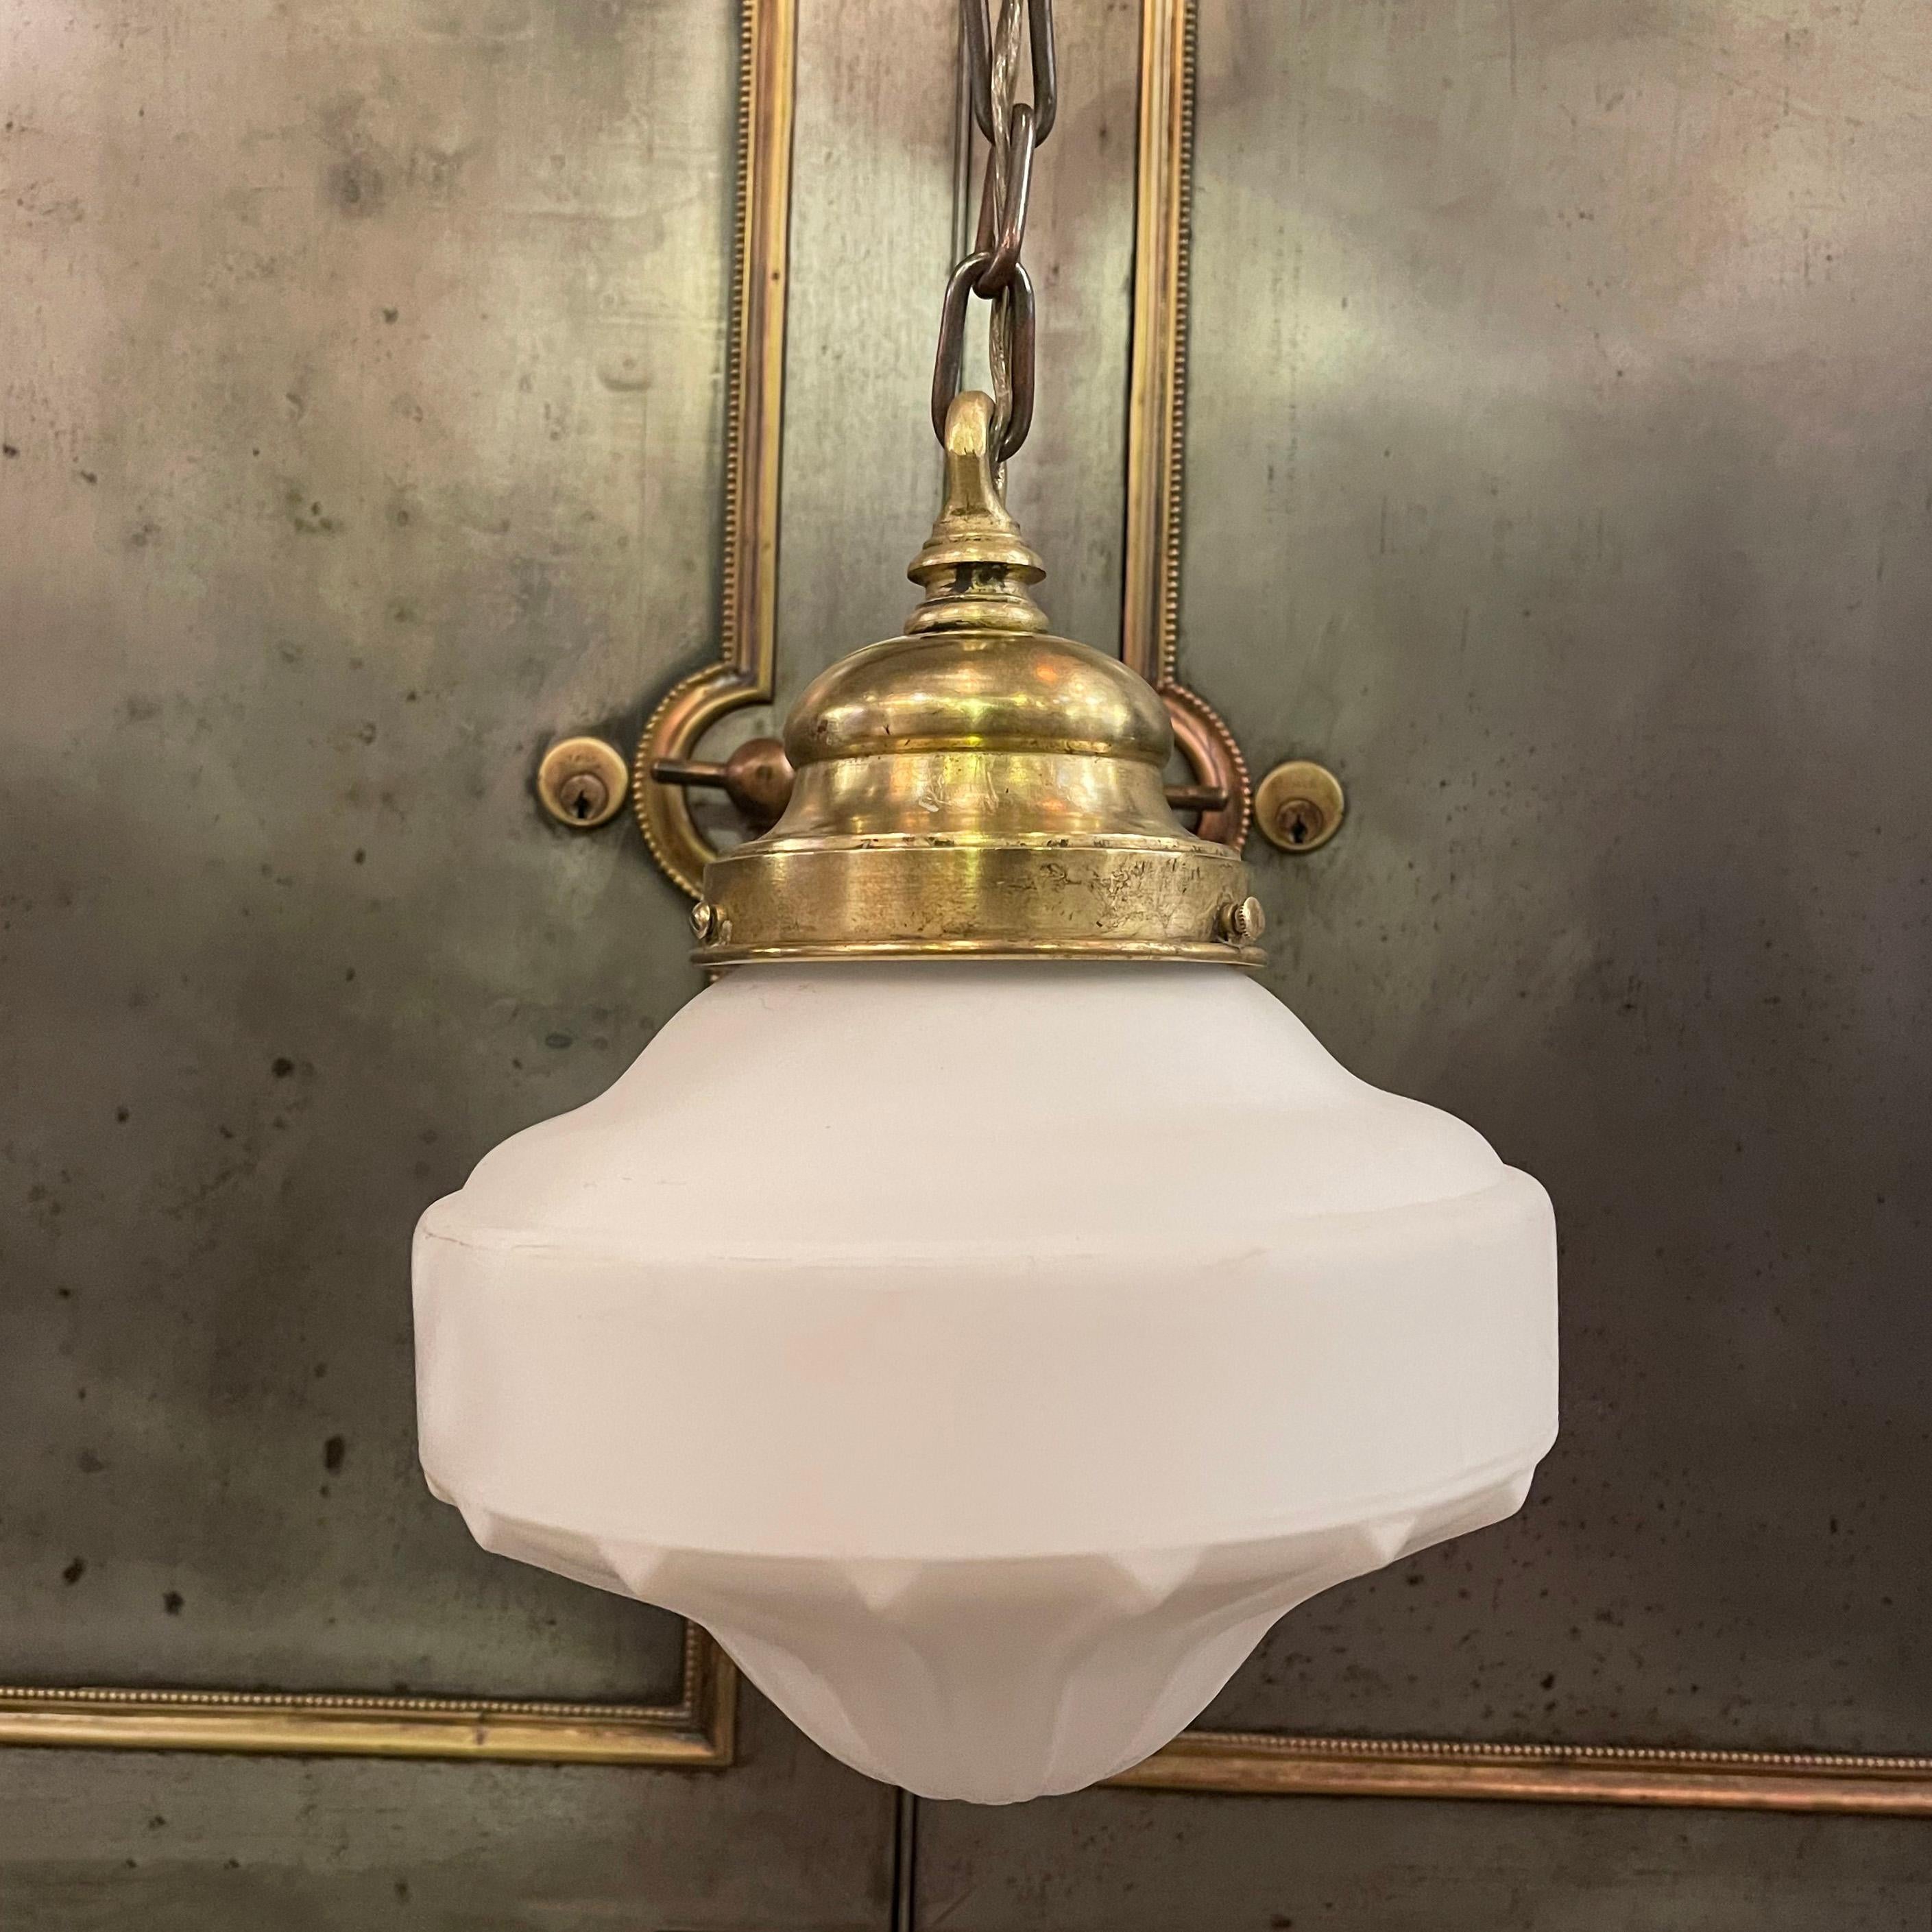 Art Deco pendant light features a saucer shape, frosted glass shade with ridged bottom with brass hardware including fitter, chain link and ceiling canopy. The pendant hangs at an overall height of 22 inches an can be shortened. The fixture height